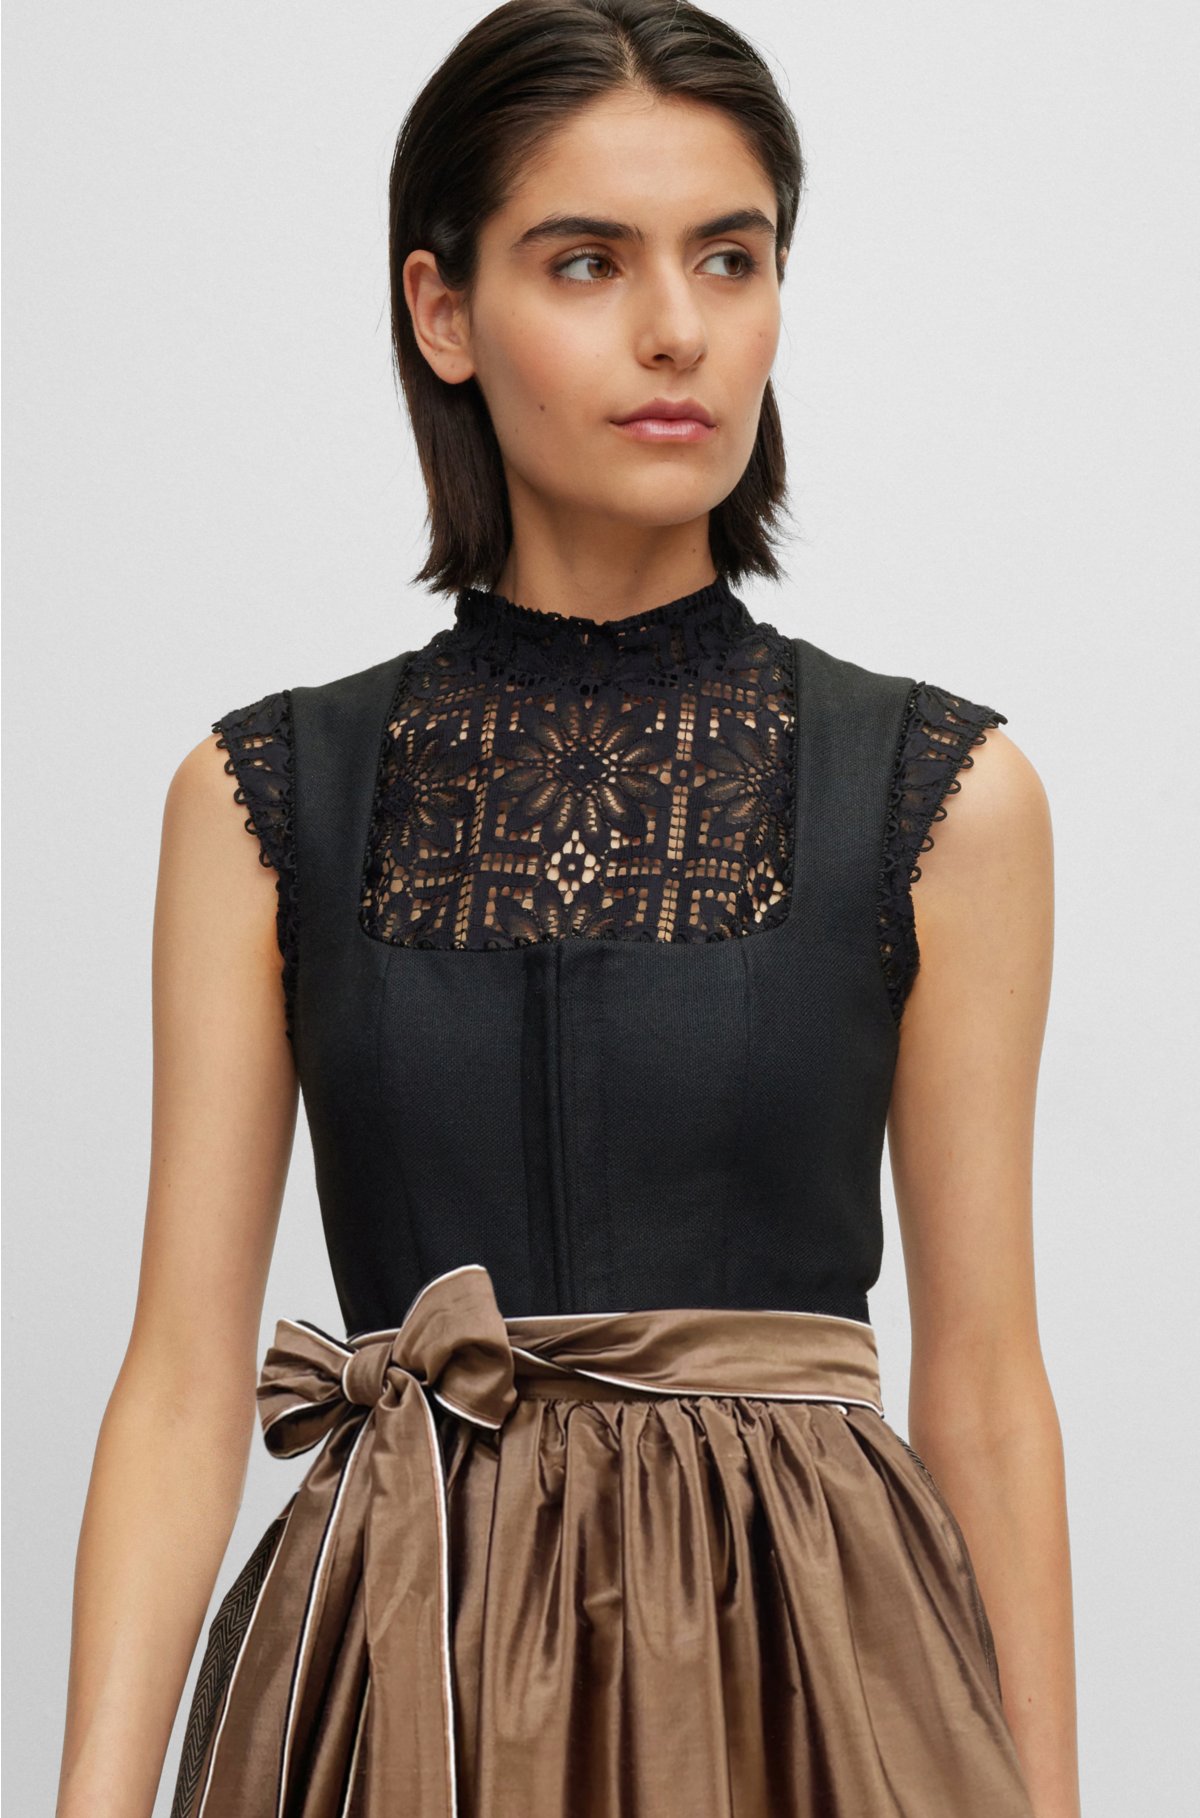 BOSS x Kinga Mathe cropped blouse in floral lace, Black